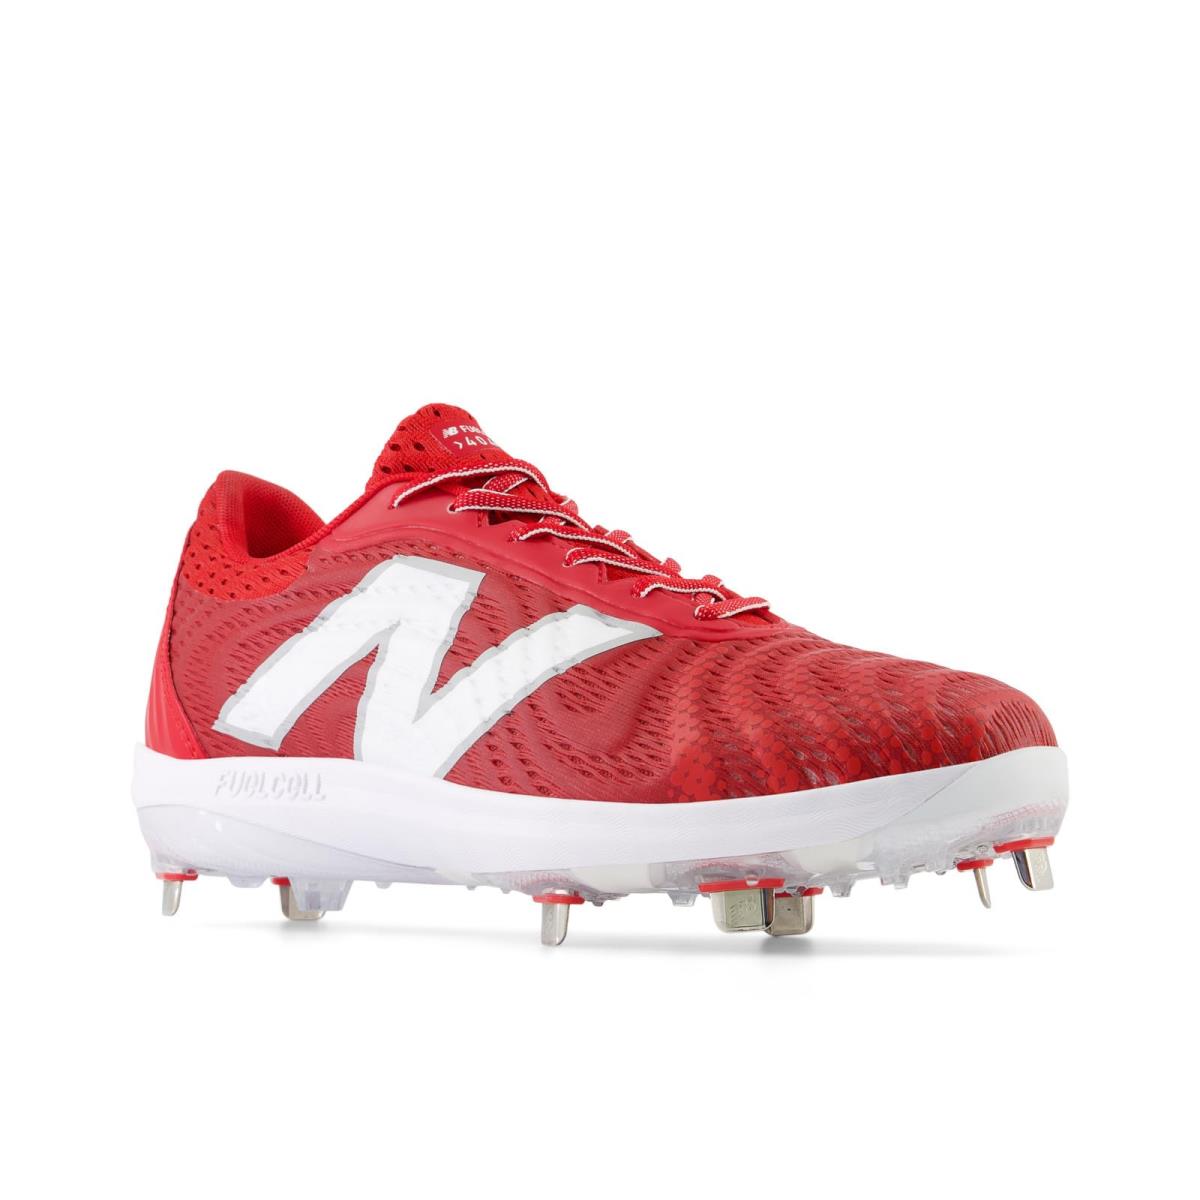 Man`s Sneakers Athletic Shoes New Balance Fuelcell 4040 v7 Metal Team Red/Optic White